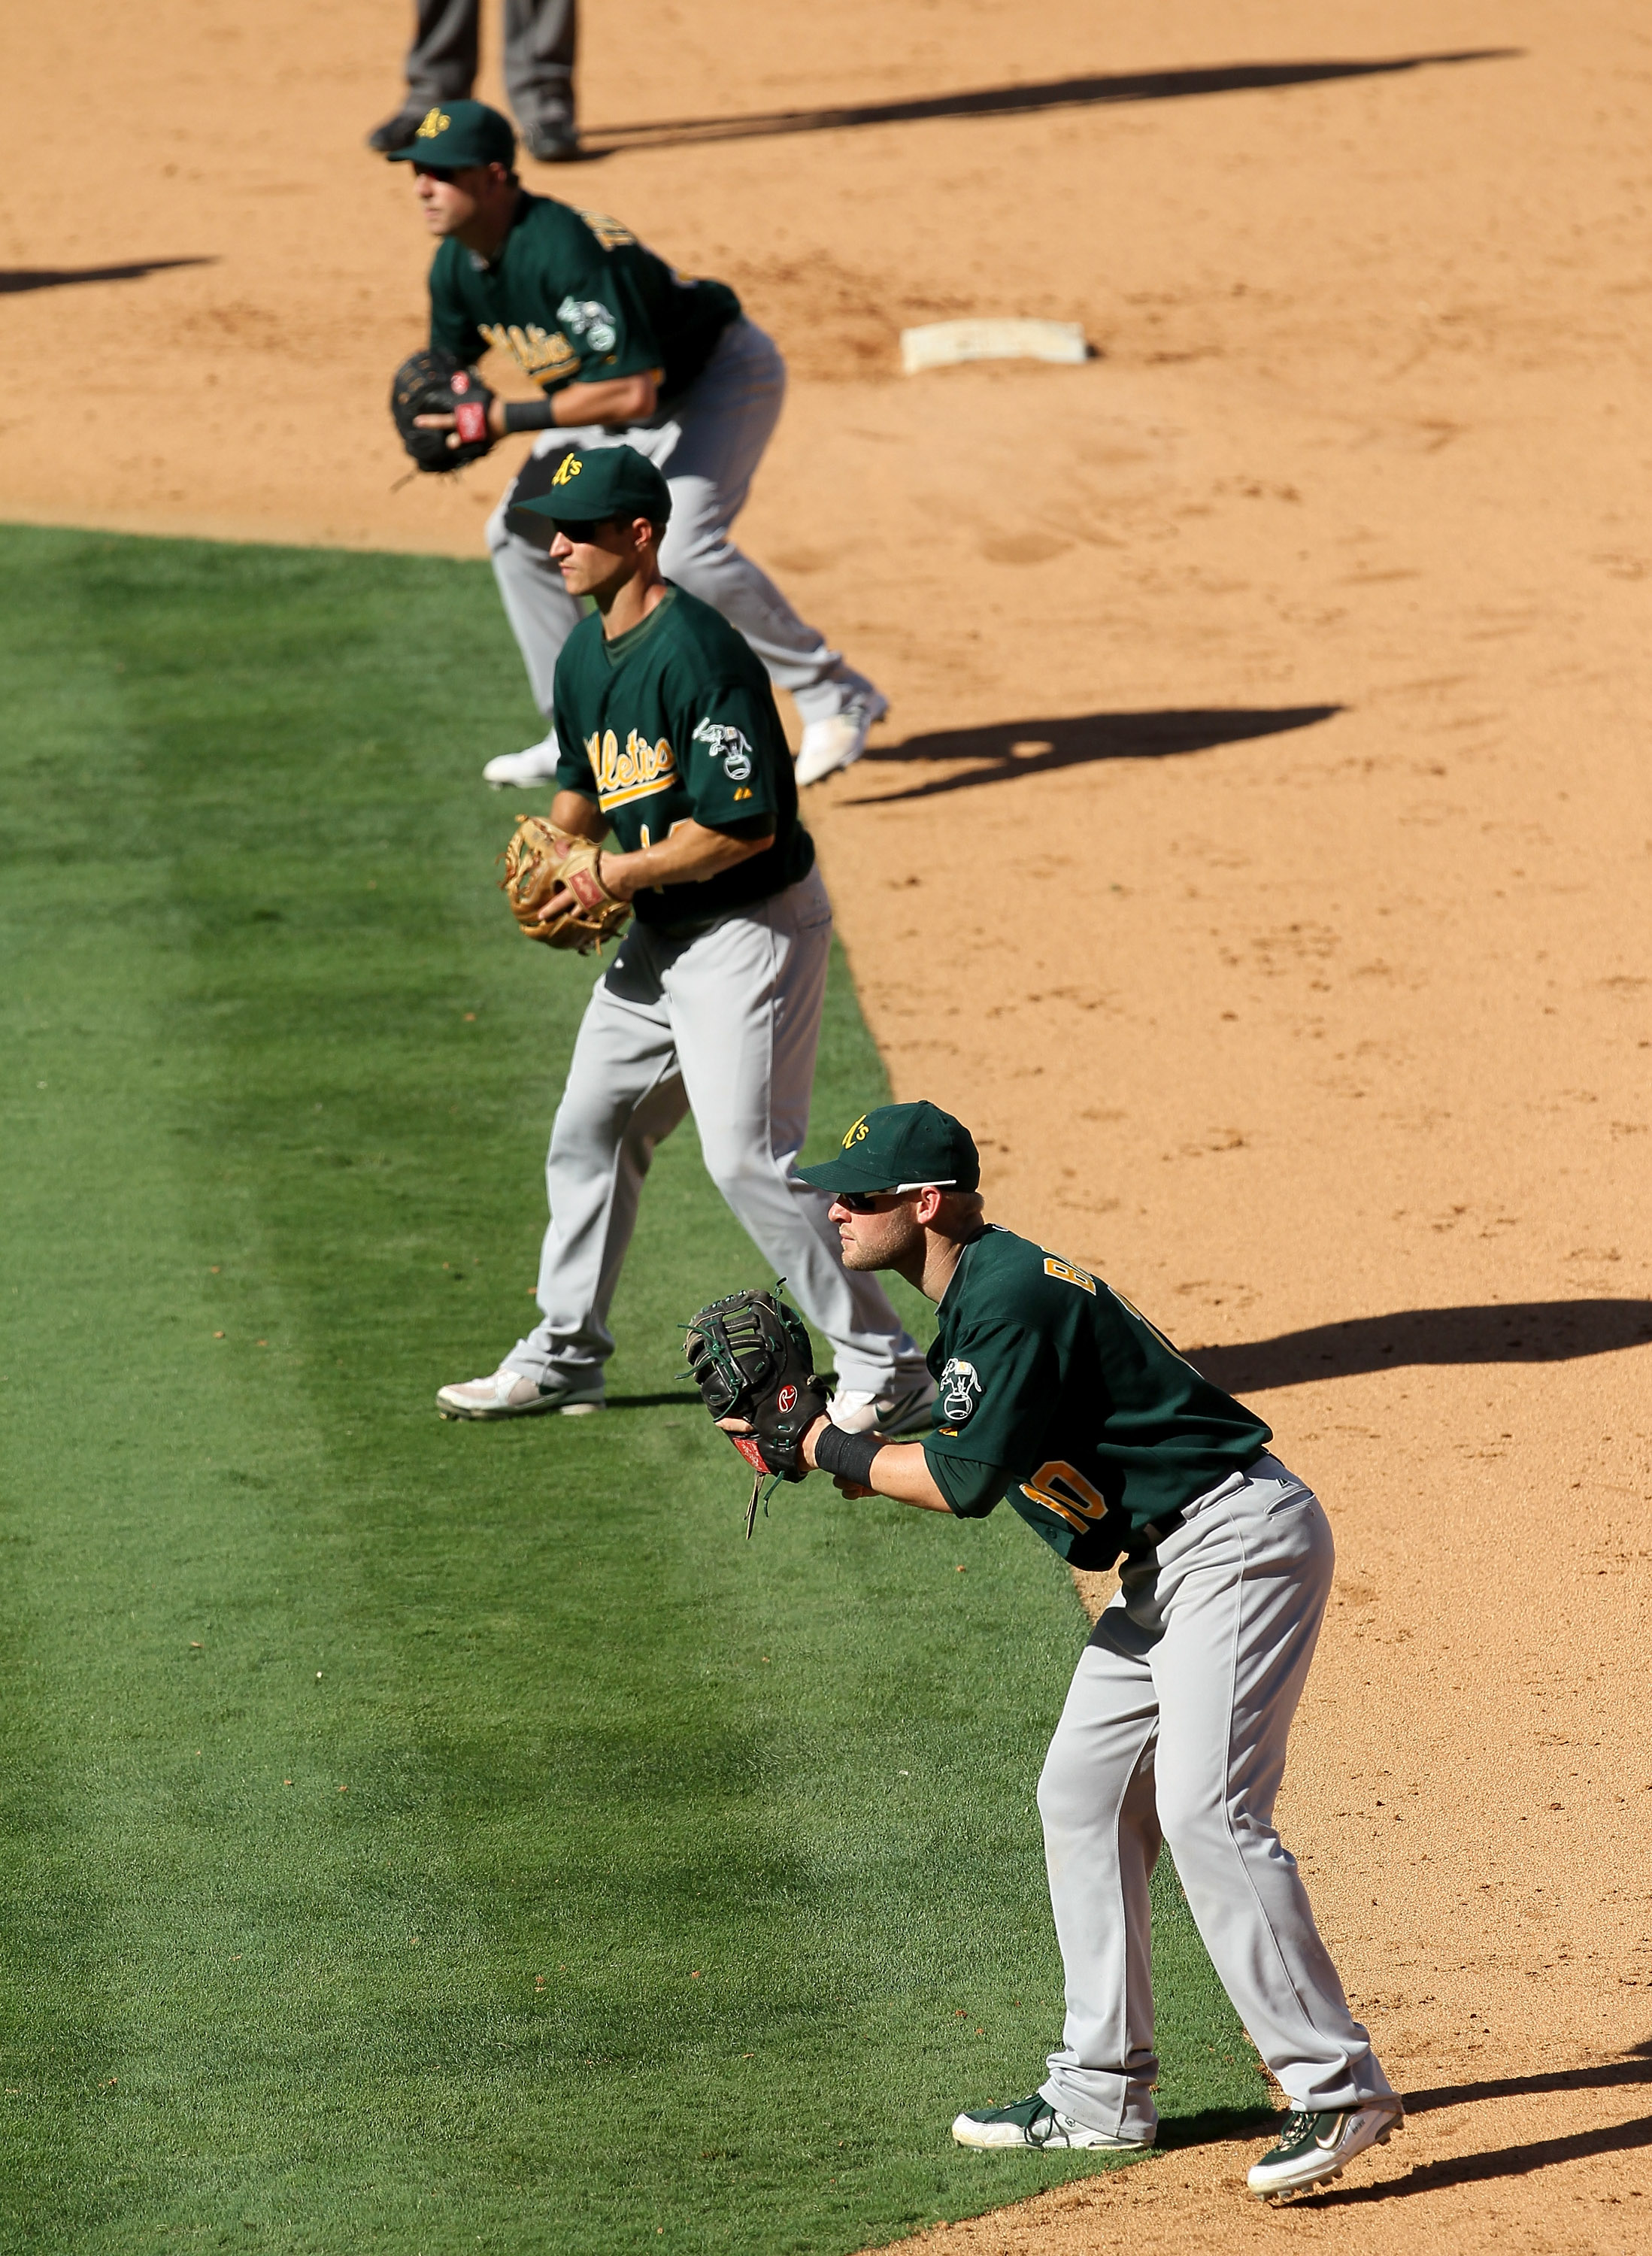 ANAHEIM, CA - SEPTEMBER 29:  First baseman Daric Barton #14, second baseman Mark Ellis #14, and extra infielder Steven Tolleson #30 of the Oakland Athletics fill the right side of the infield as the Los Angeles Angels of Anaheim bat with the bases loaded,